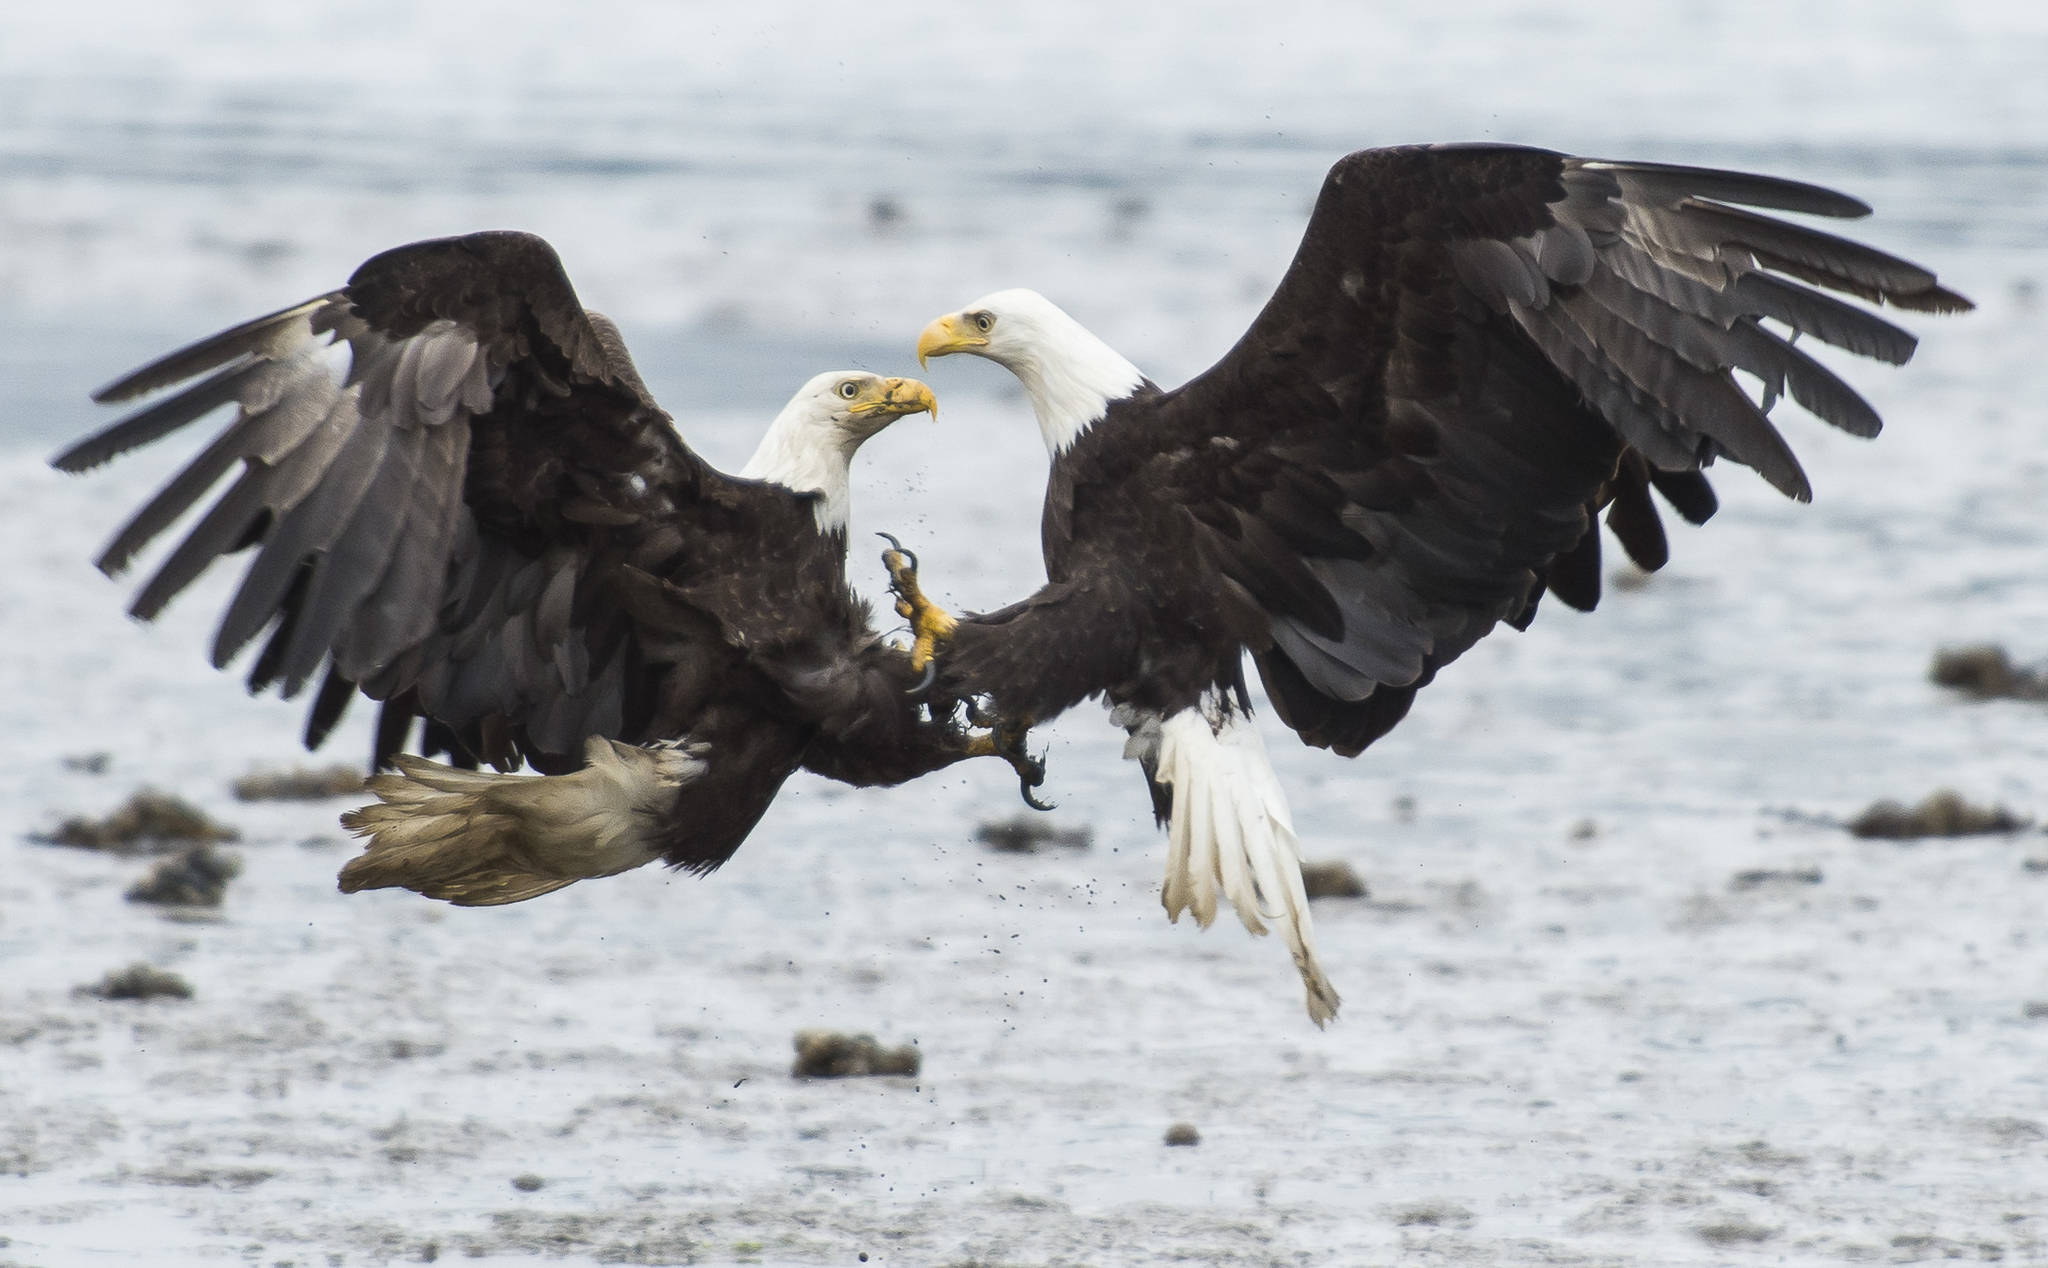 Bald eagles fight over salmon on the outgoing tide near the Macaulay Salmon Hatchery on Tuesday, July 17, 2018. (Michael Penn | Juneau Empire)